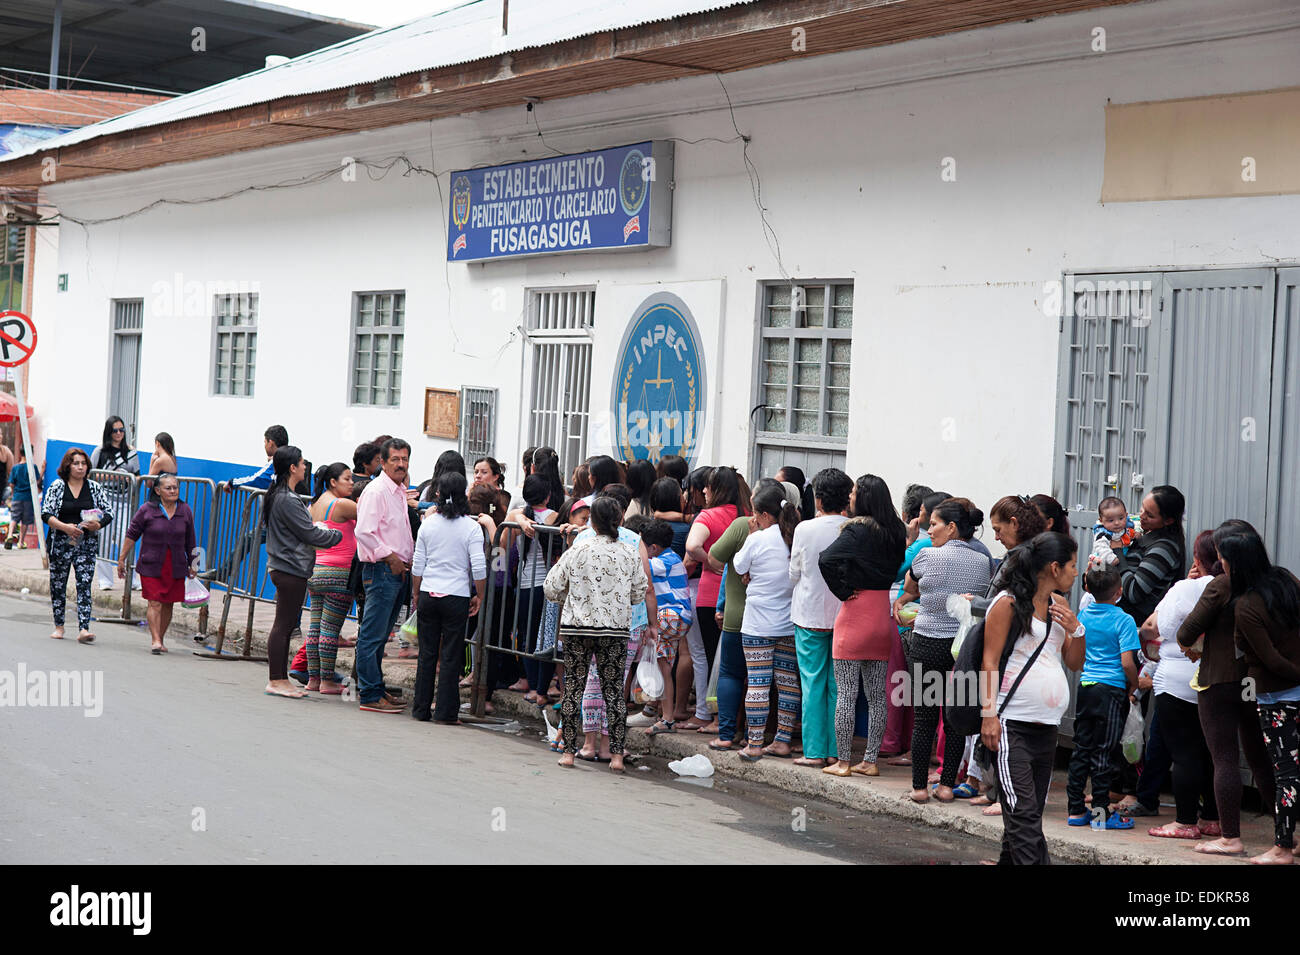 Day before Christmas women queue outside prison to visit their loved ones. Fusagasuga town, Colombia, South America Stock Photo